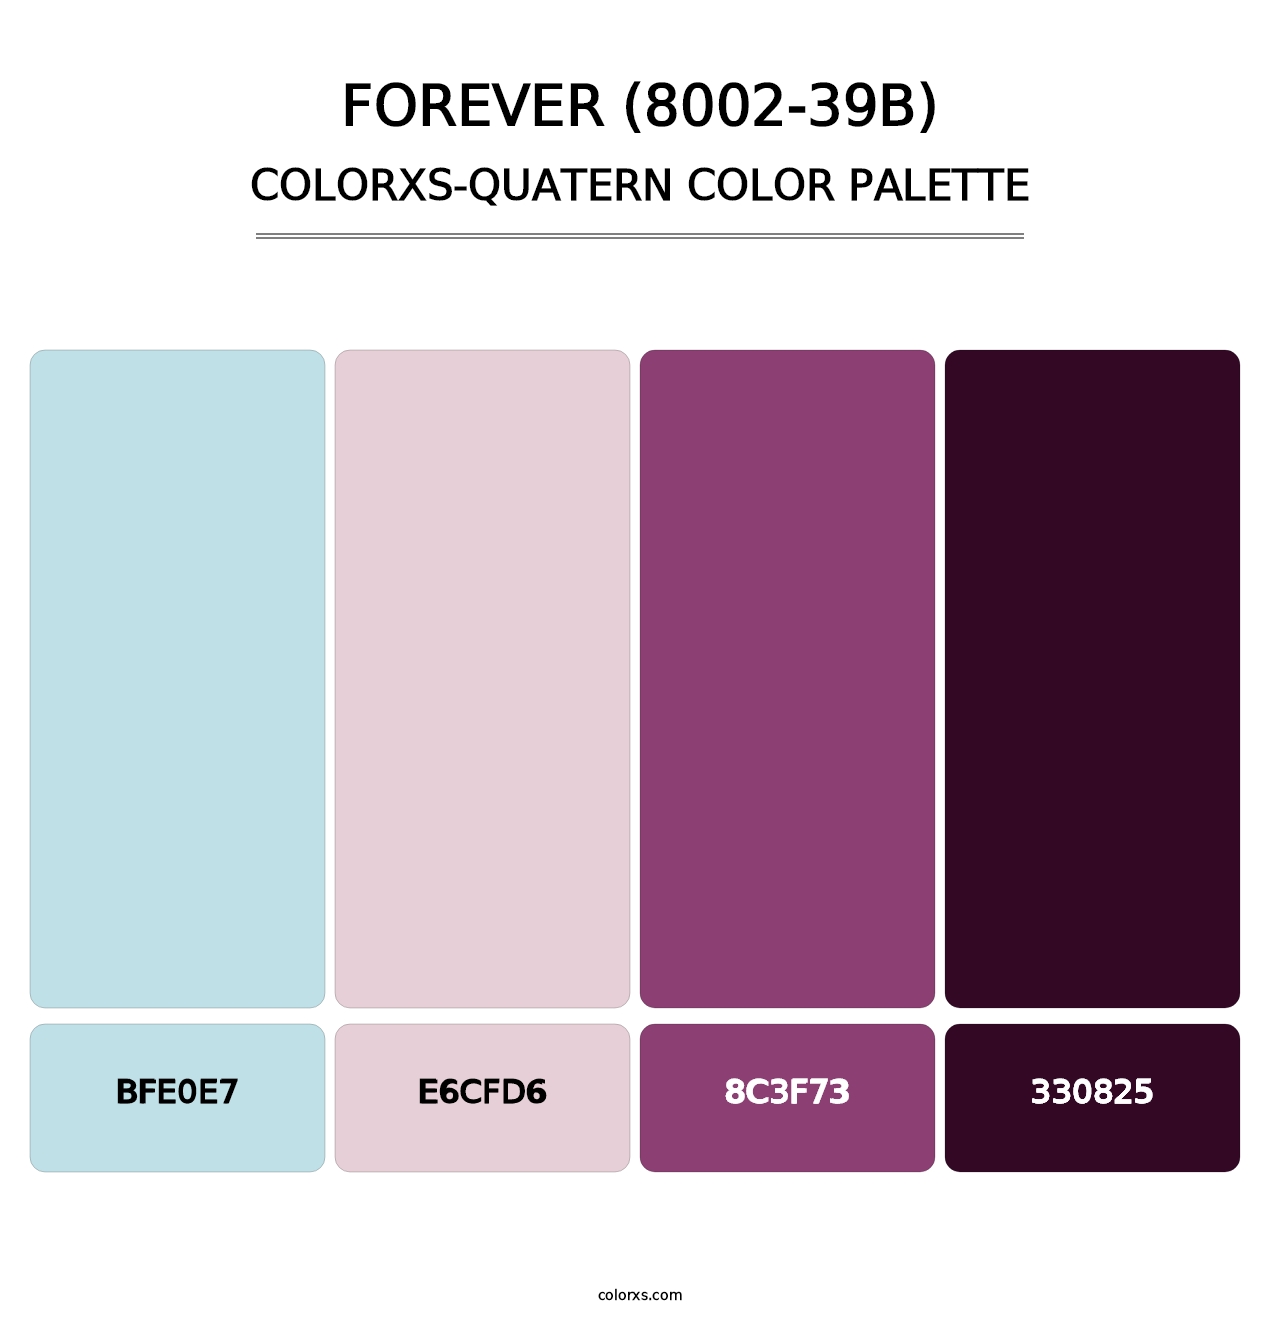 Forever (8002-39B) - Colorxs Quatern Palette